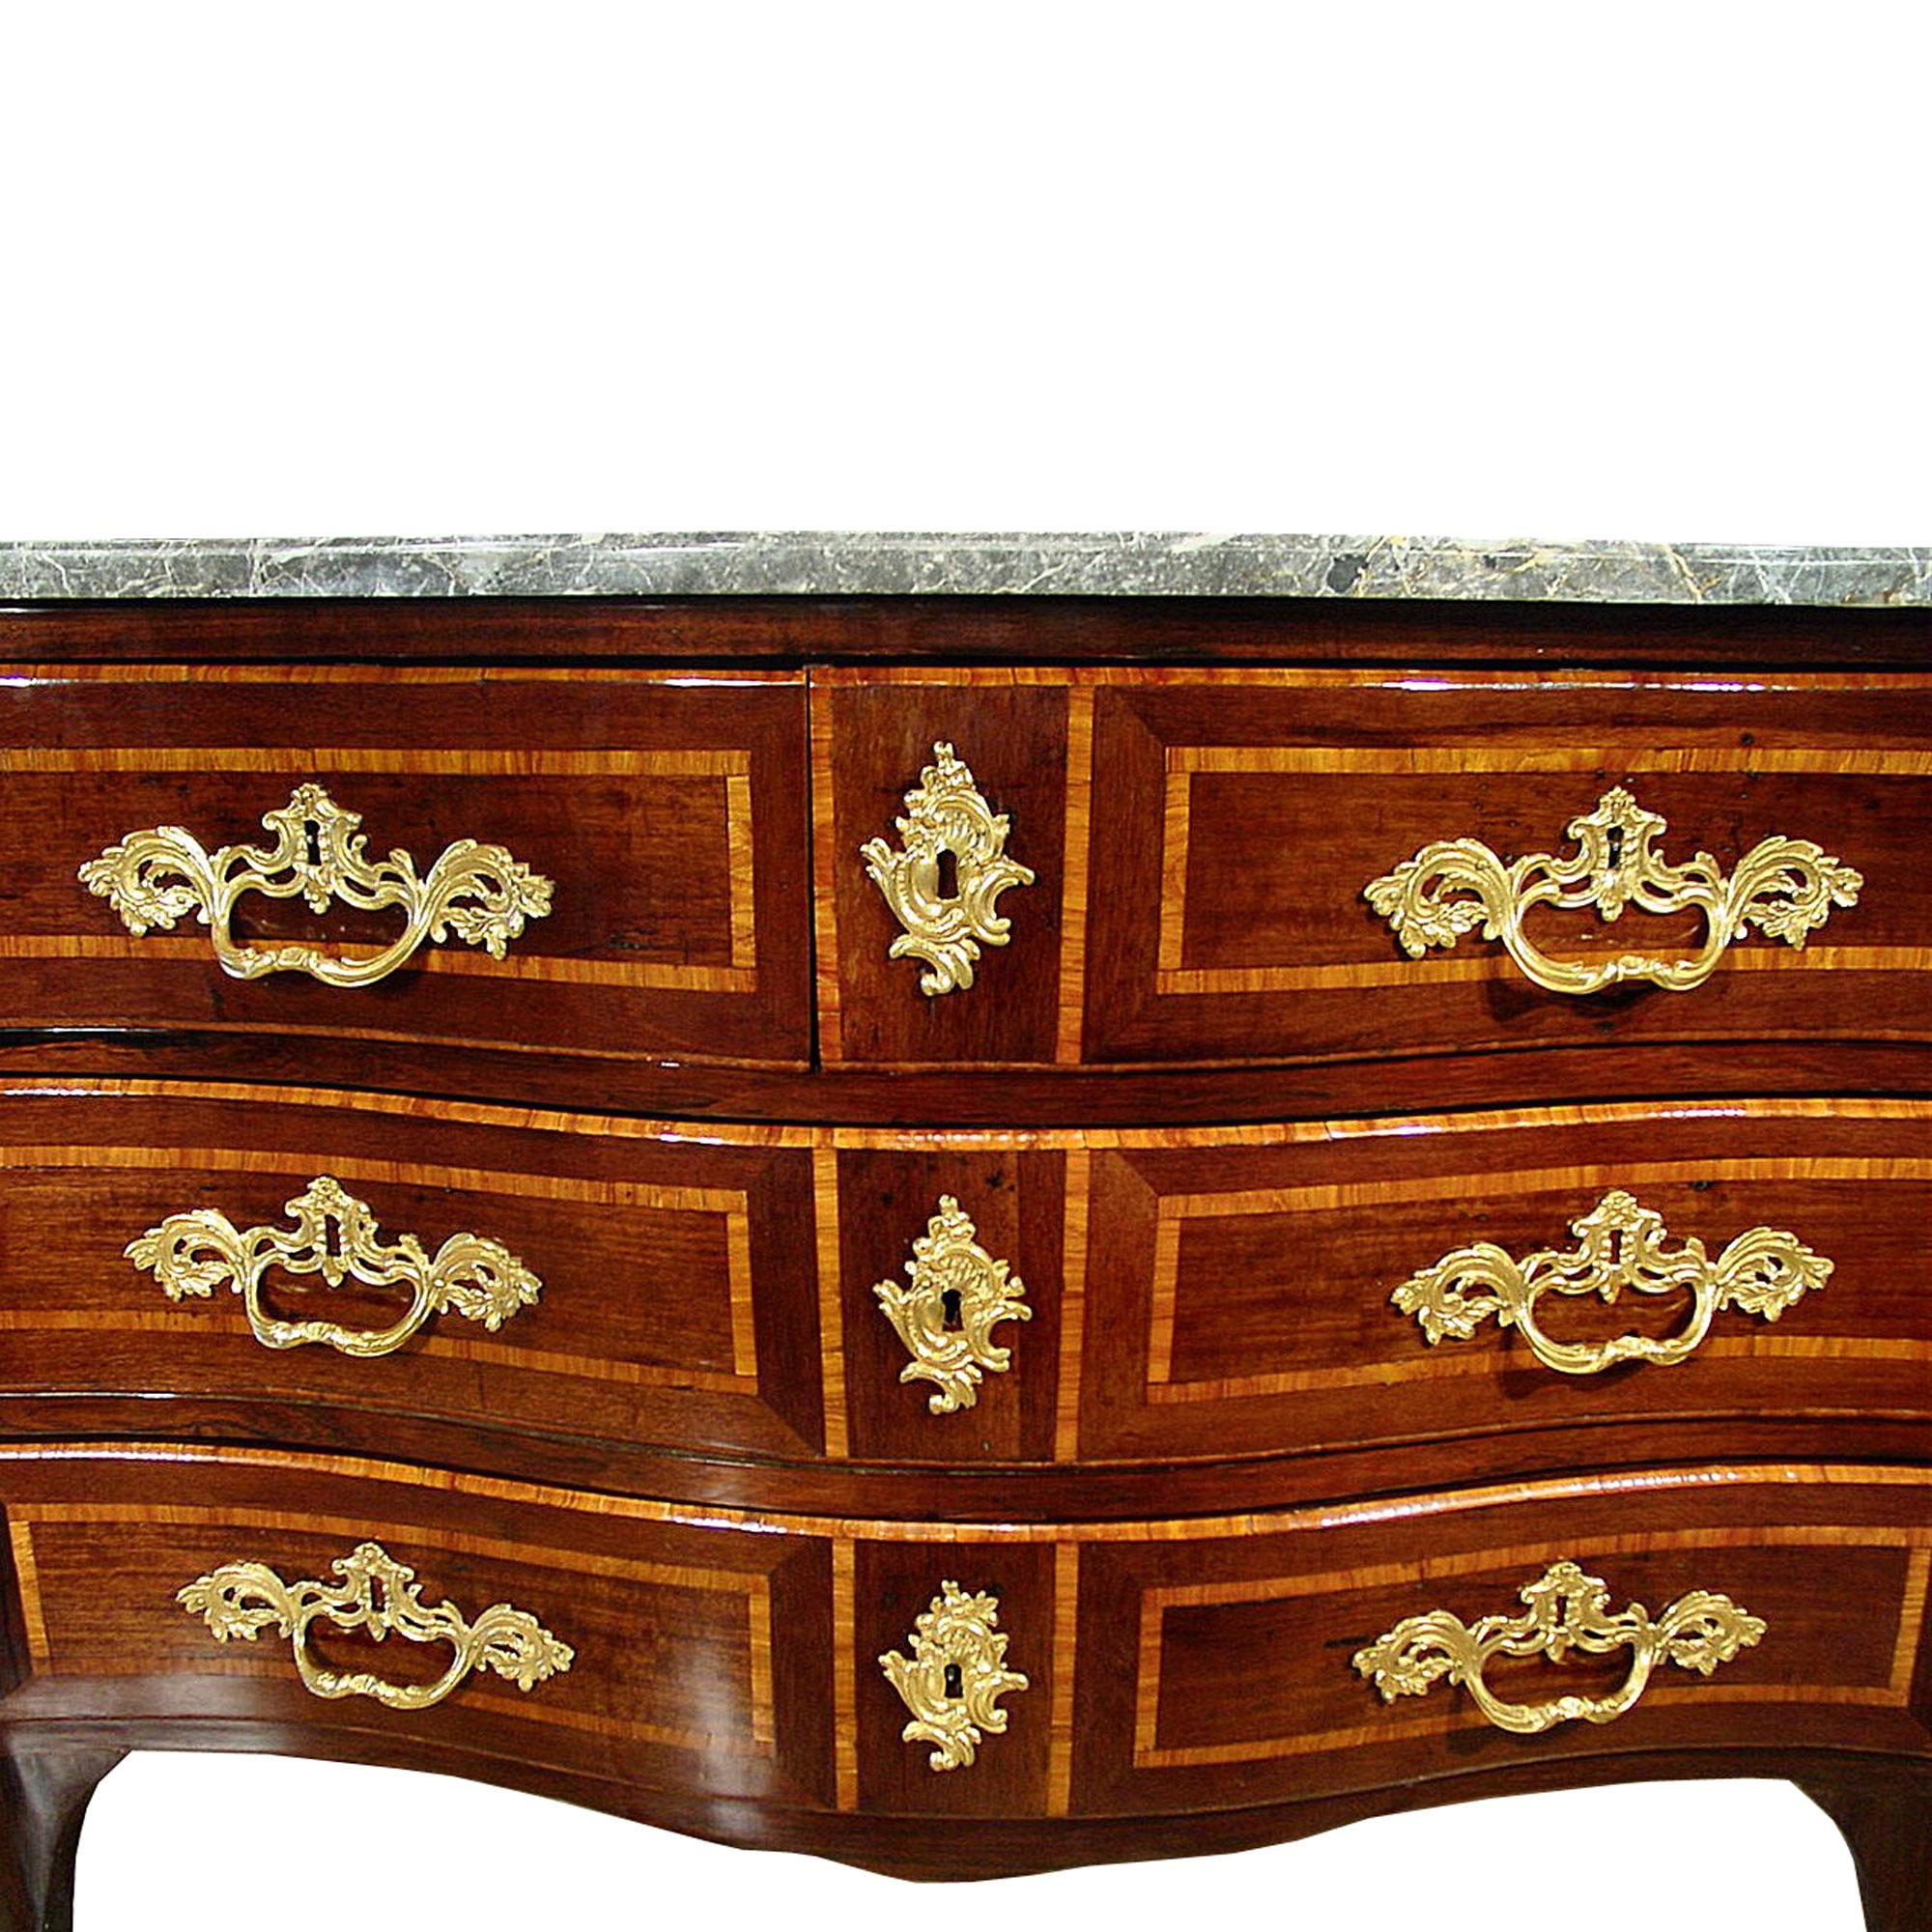 An elegant French mid 18th century Regence period kingwood commode stamped JME, 'Lardin'. The chest has three wide drawers with very impressive finely chased ormolu handles centered by ormolu keyhole escutcheons. The drawers and sides are bordered